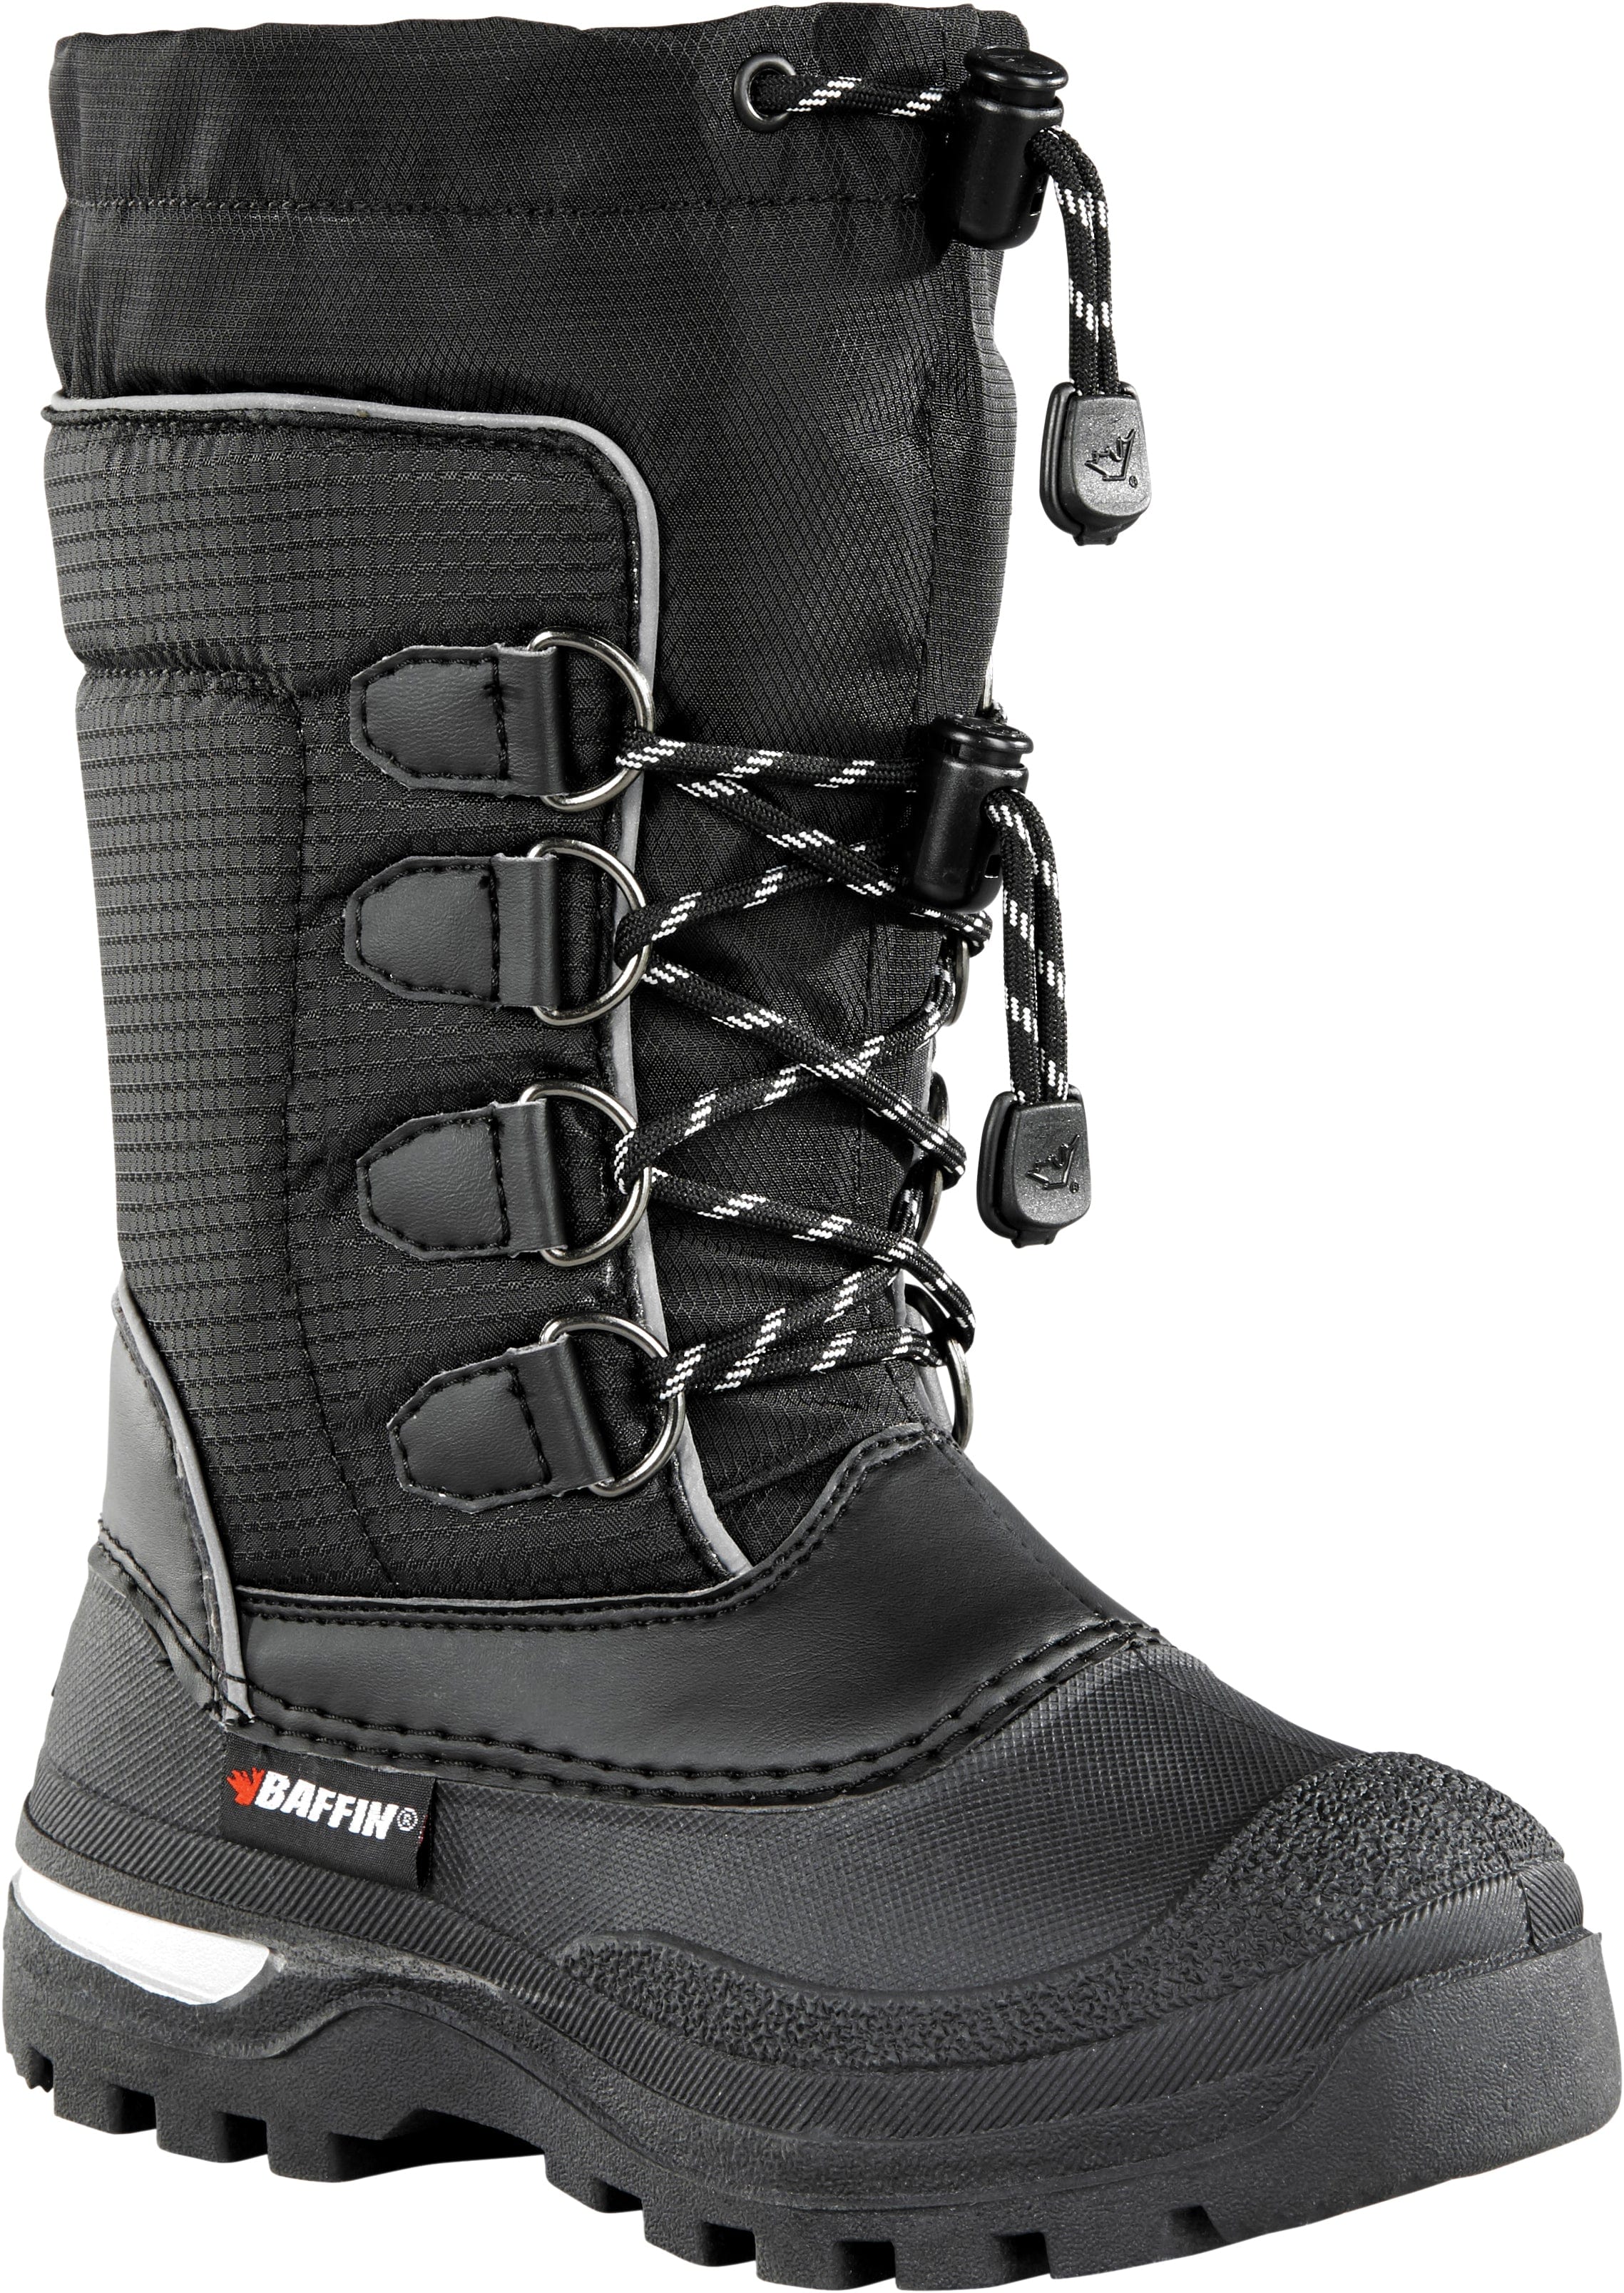 Western Powersports Boots Black / 1 Youth Pinetree Boots by Baffin SNTR-Y026-BK1-01